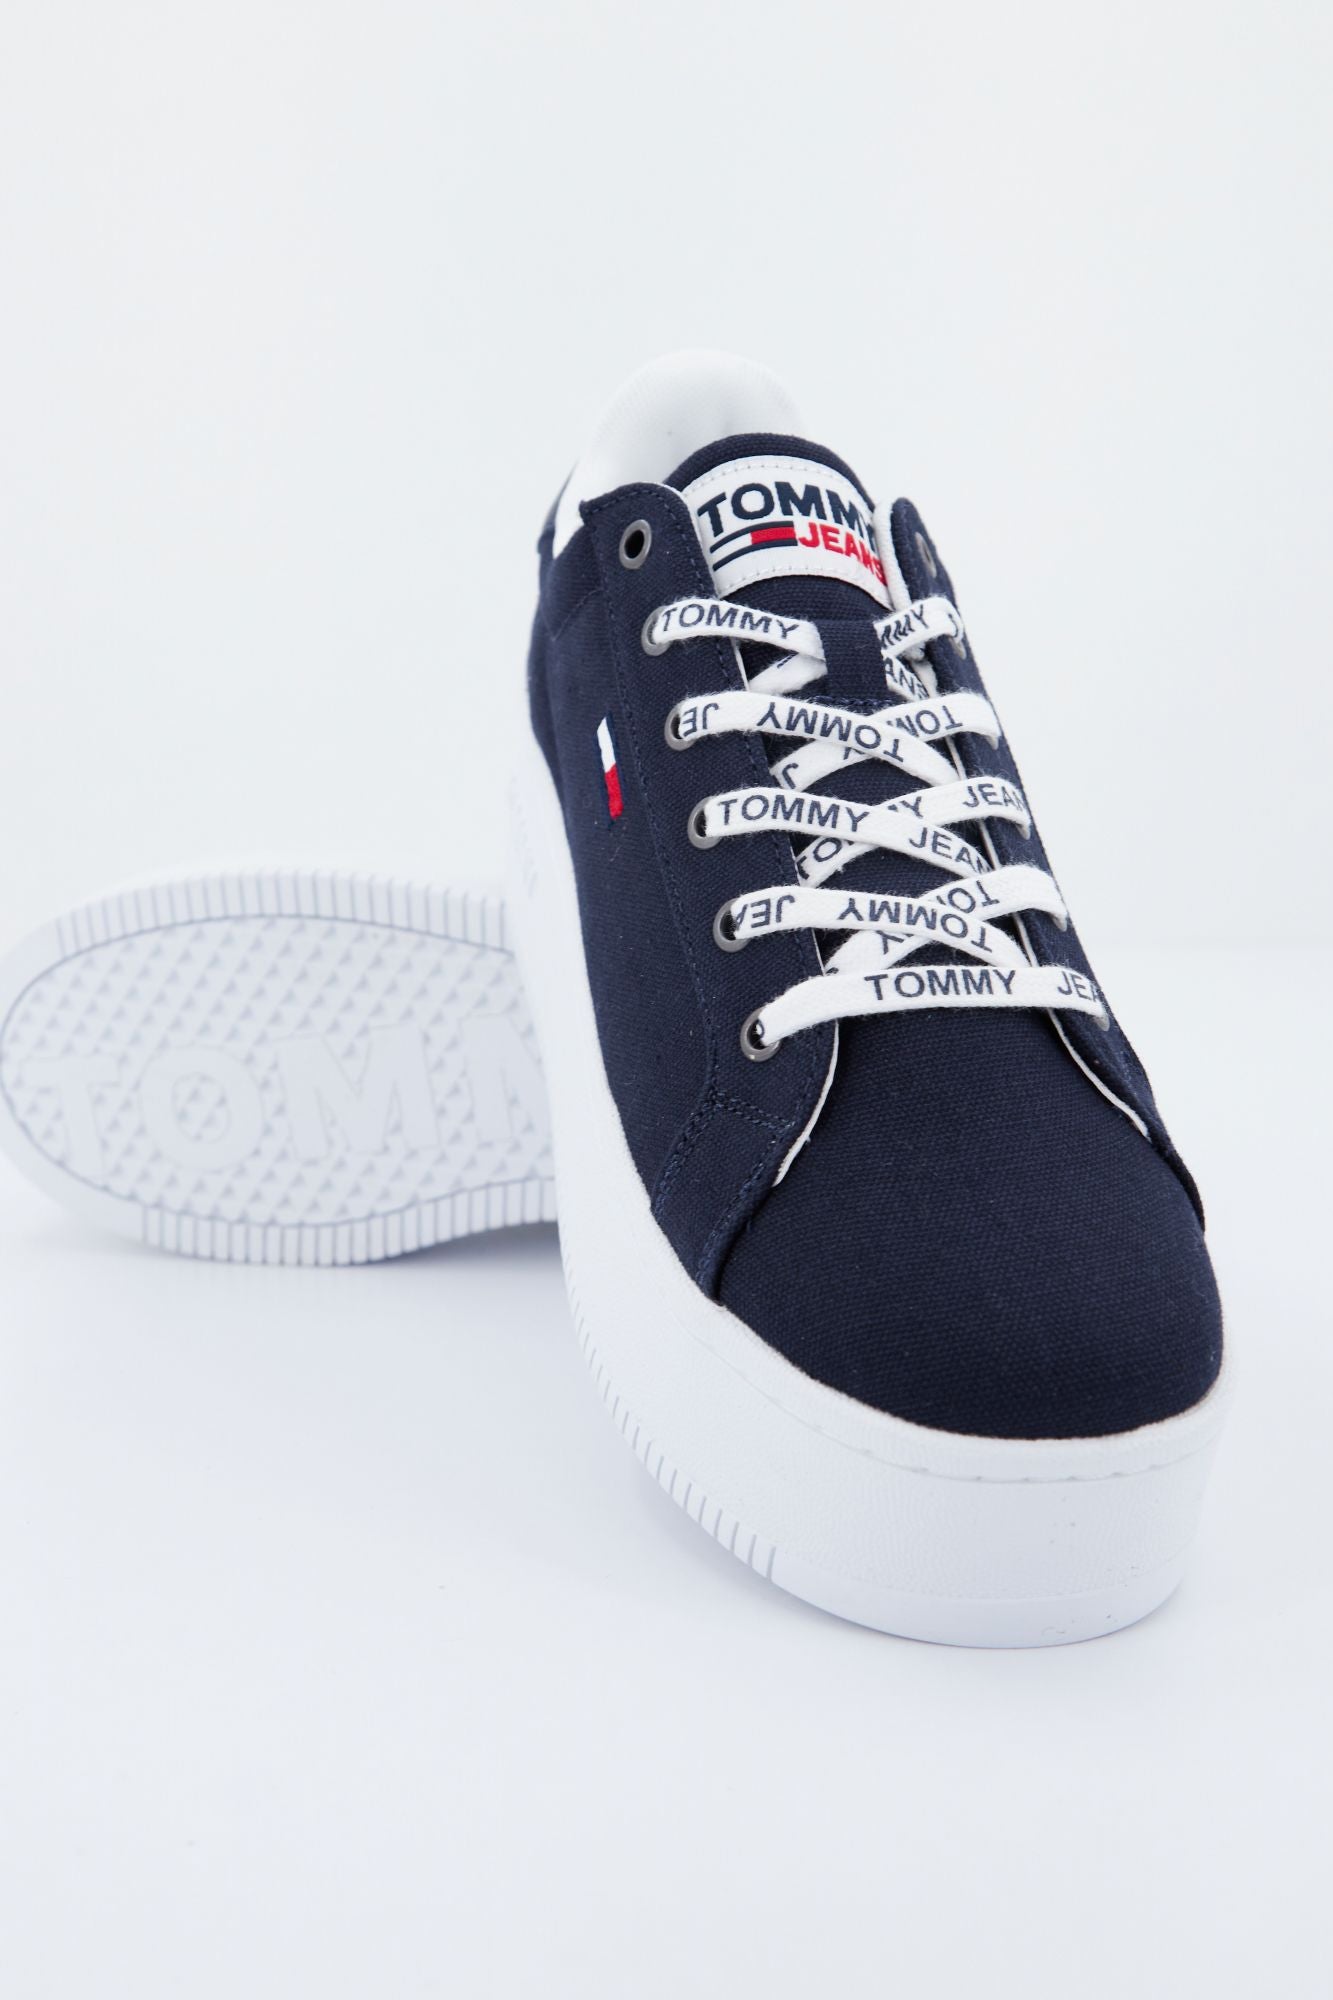 TOMMY JEANS ICONIC ESSENTIAL en color AZUL (4)